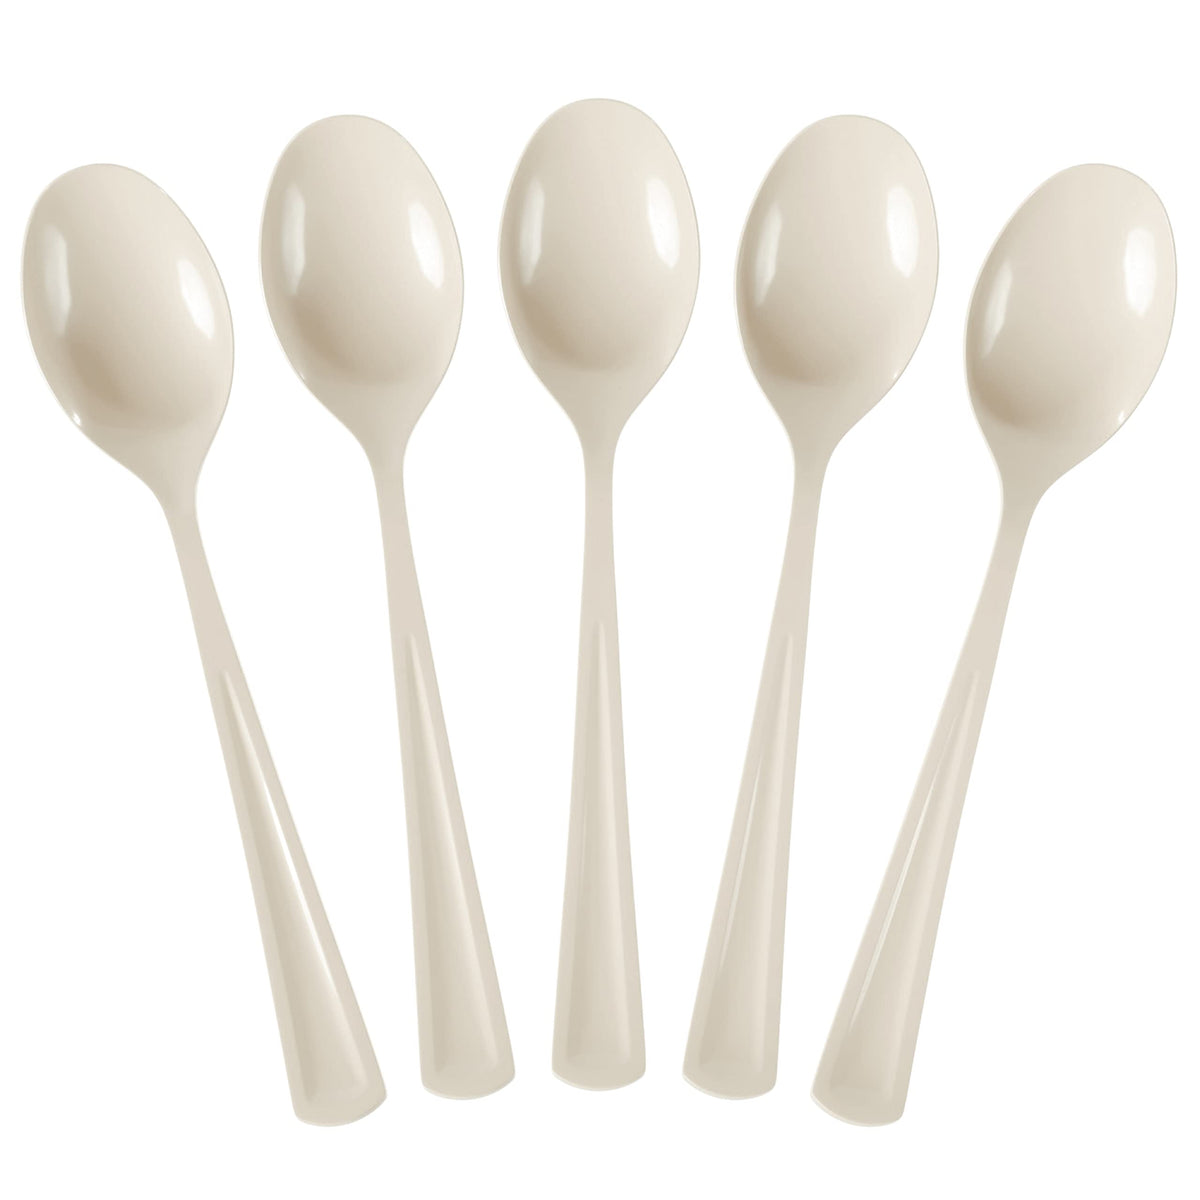 Heavy Duty Ivory Plastic Spoons | 50 Count